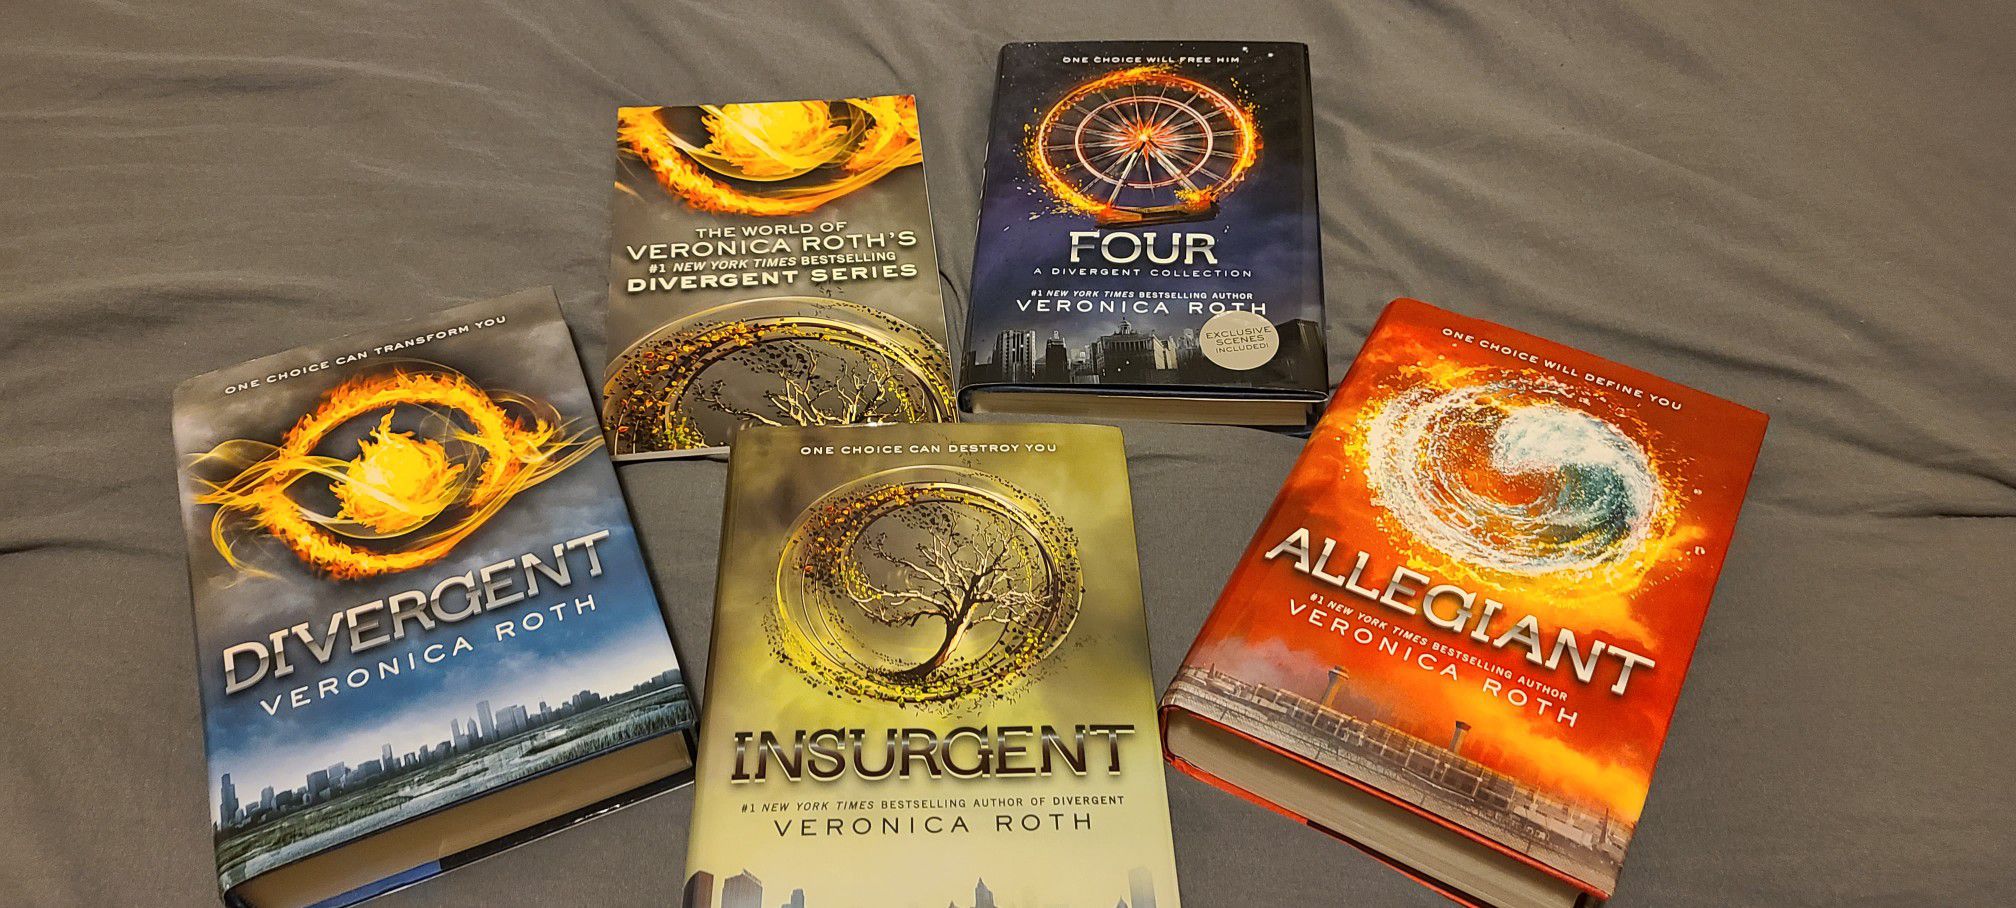 Complete Divergent Series box set and "Four" by Veronica Roth